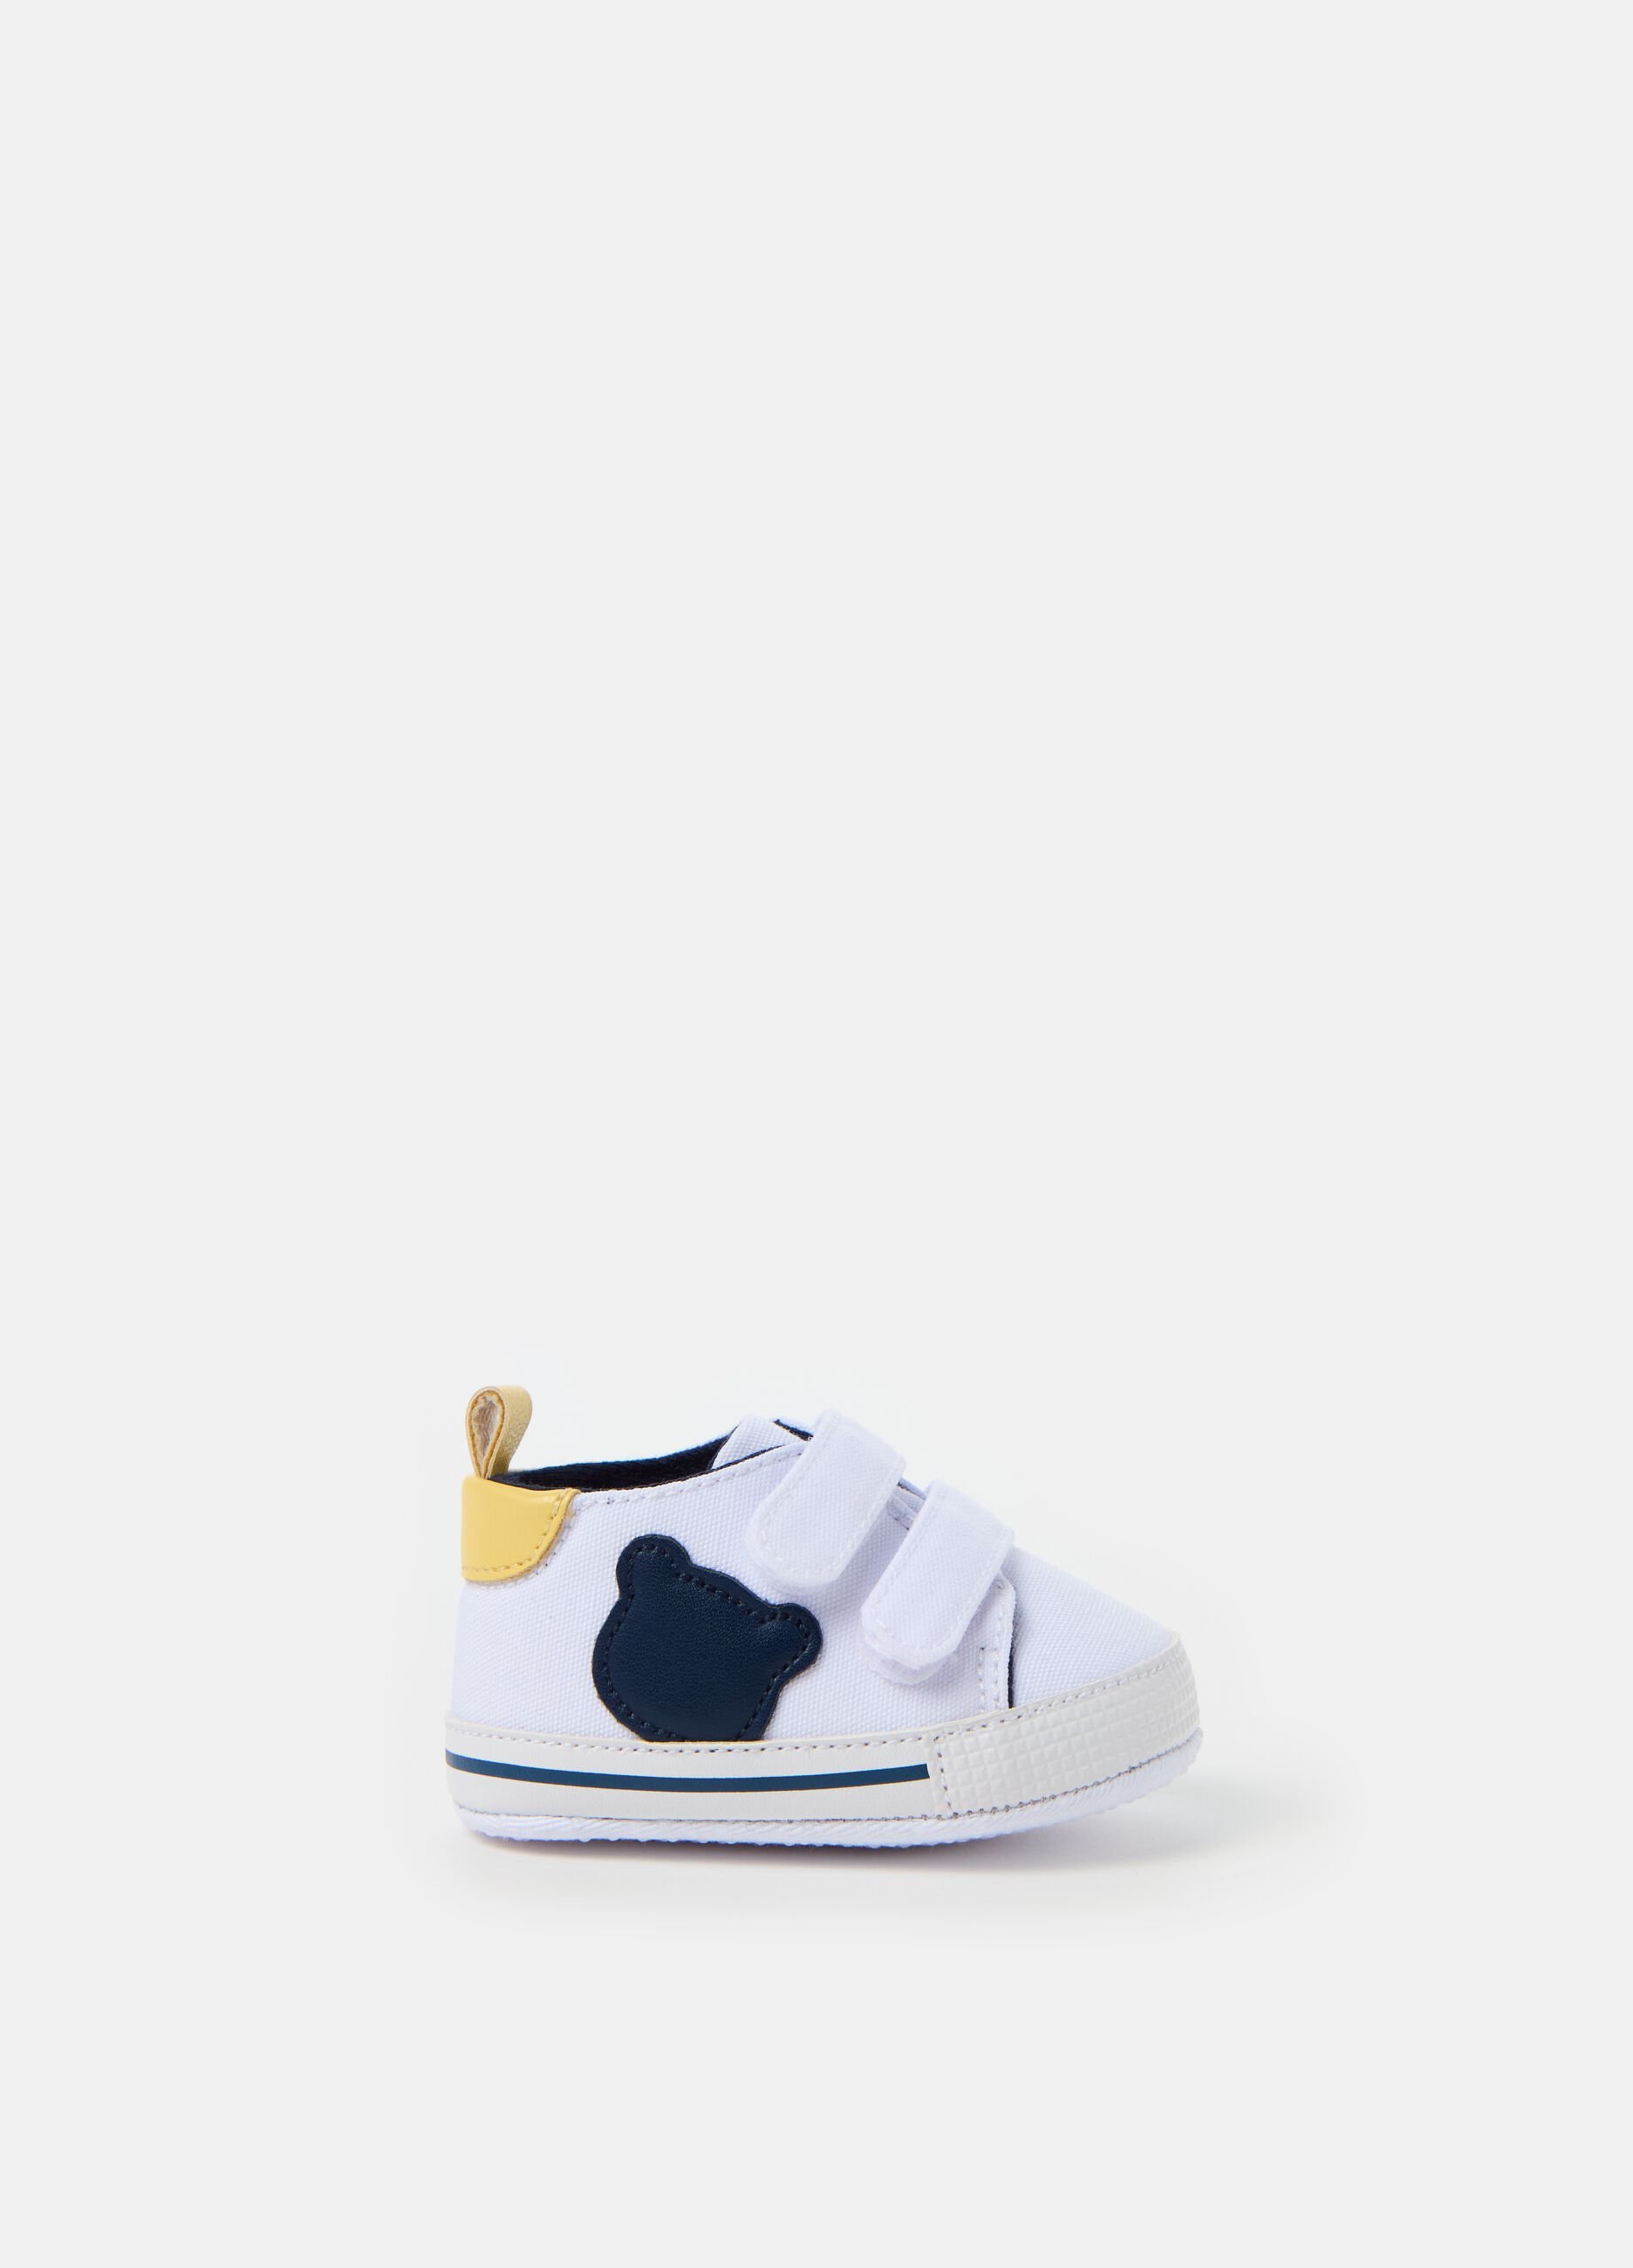 Cotton shoes with teddy bear patch